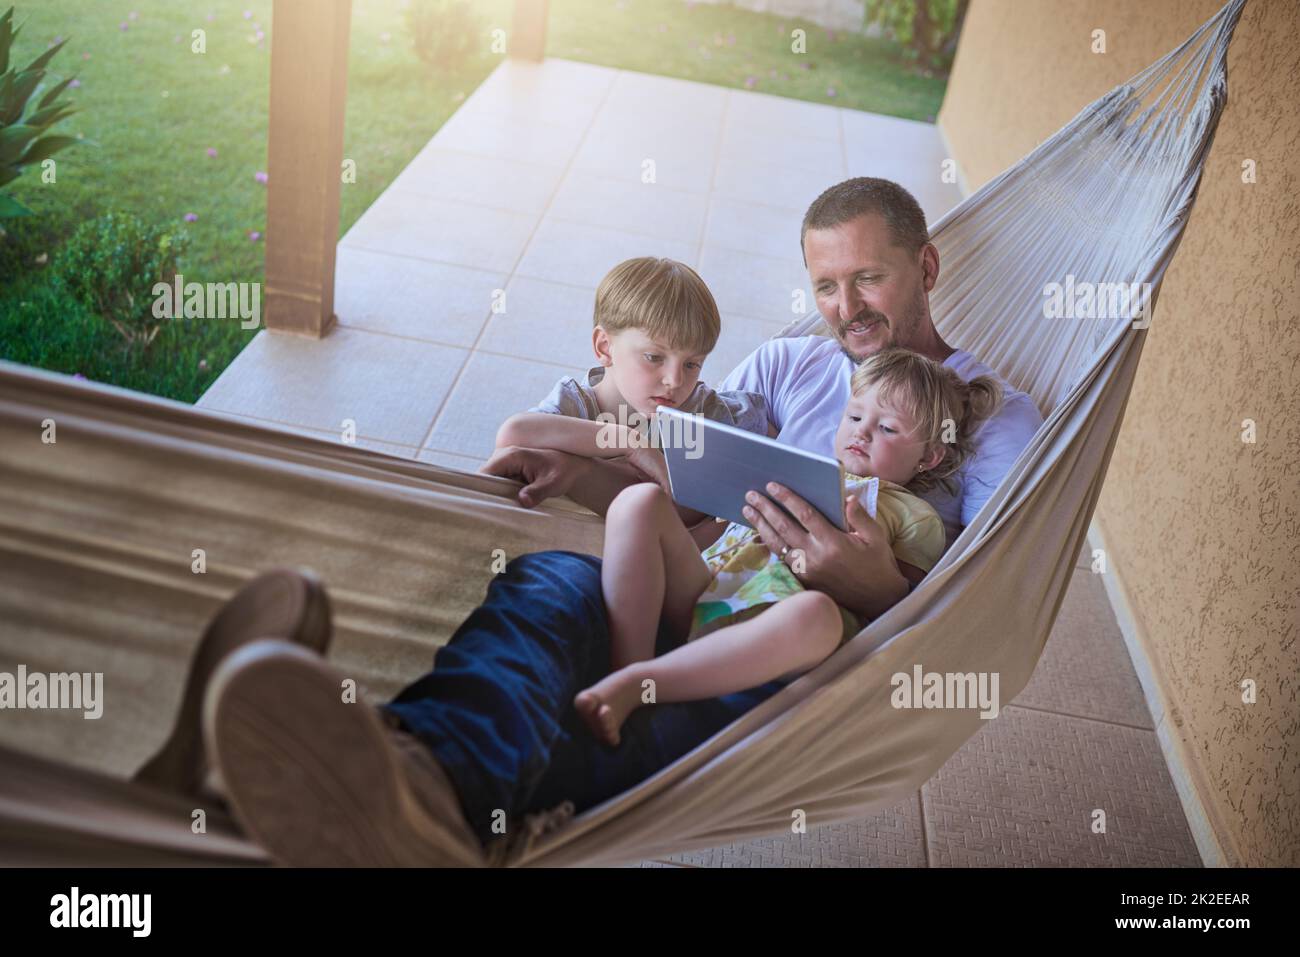 Swinging along to a chilled weekend with the kids. Shot of a father and his two little children using a digital tablet while relaxing on a hammock outdoors. Stock Photo